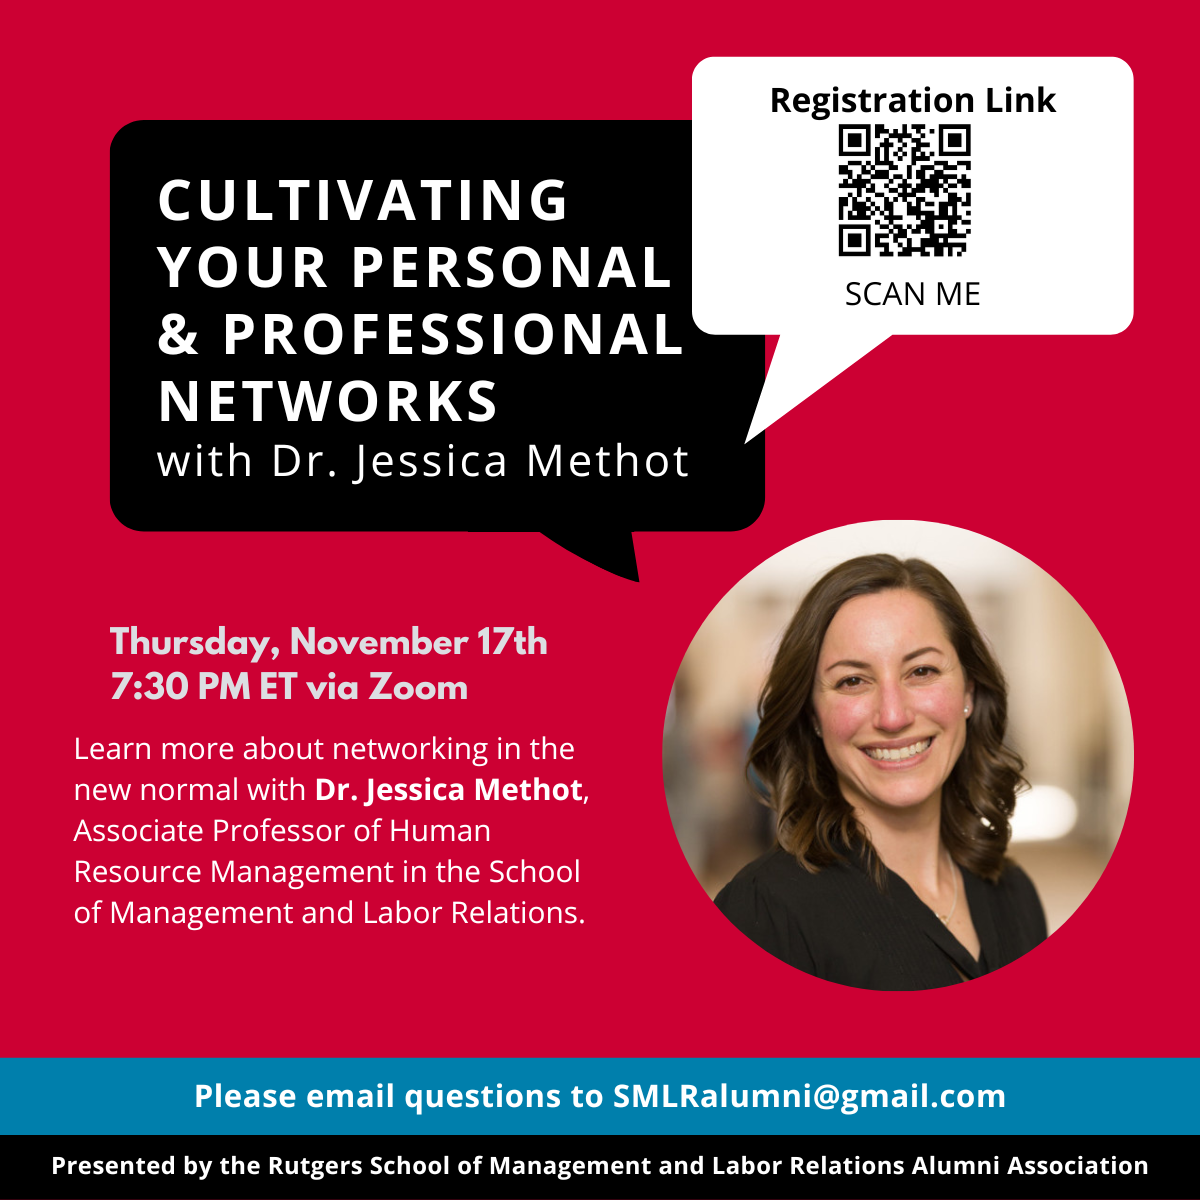 Image of SMLRAA Cultivating Your Personal & Professional Networks Event